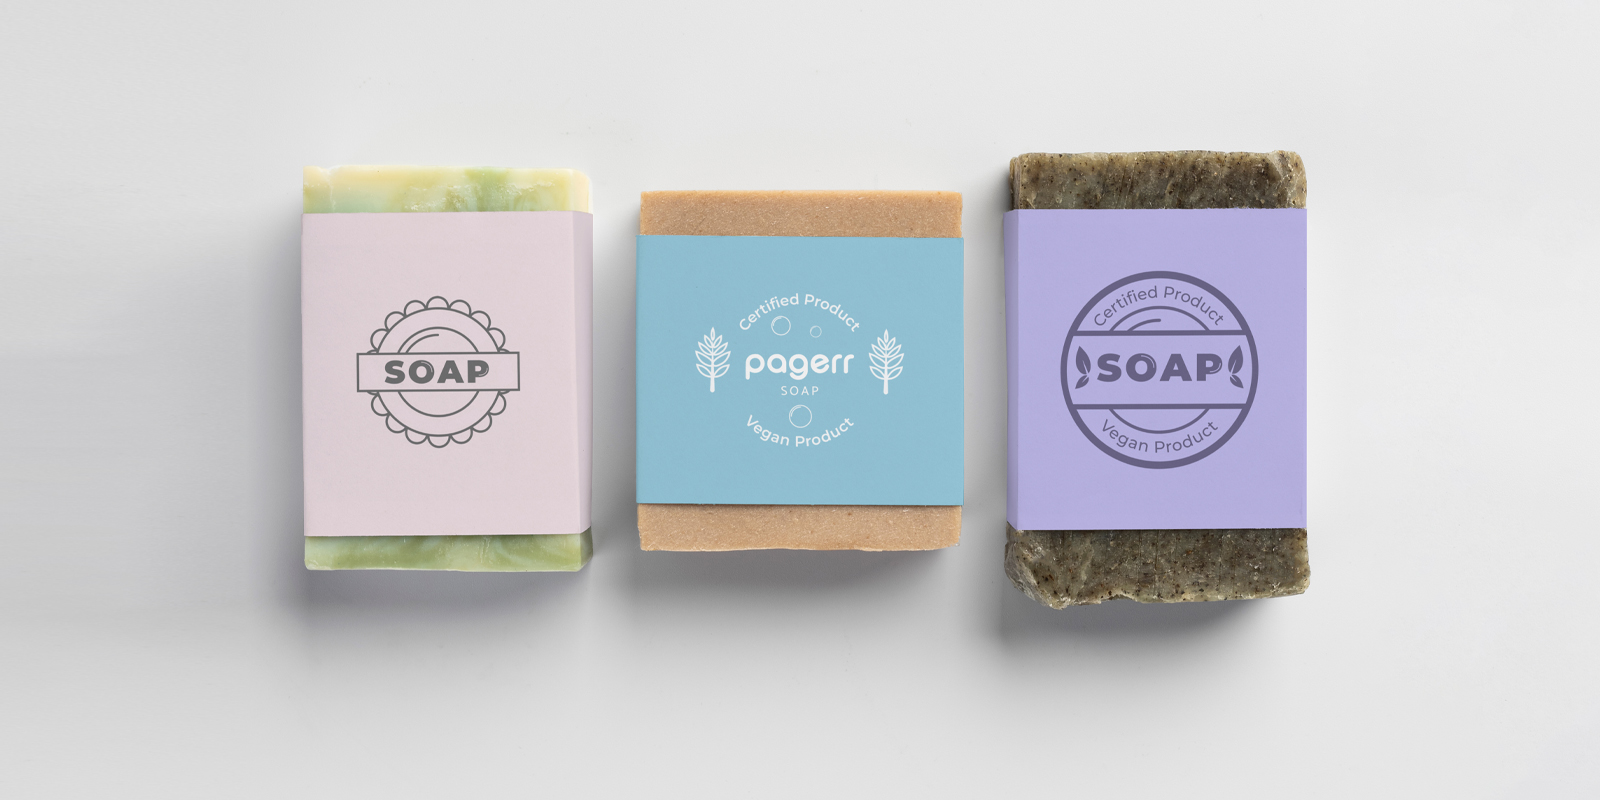 Soap labels in Launceston - Print with Pagerr